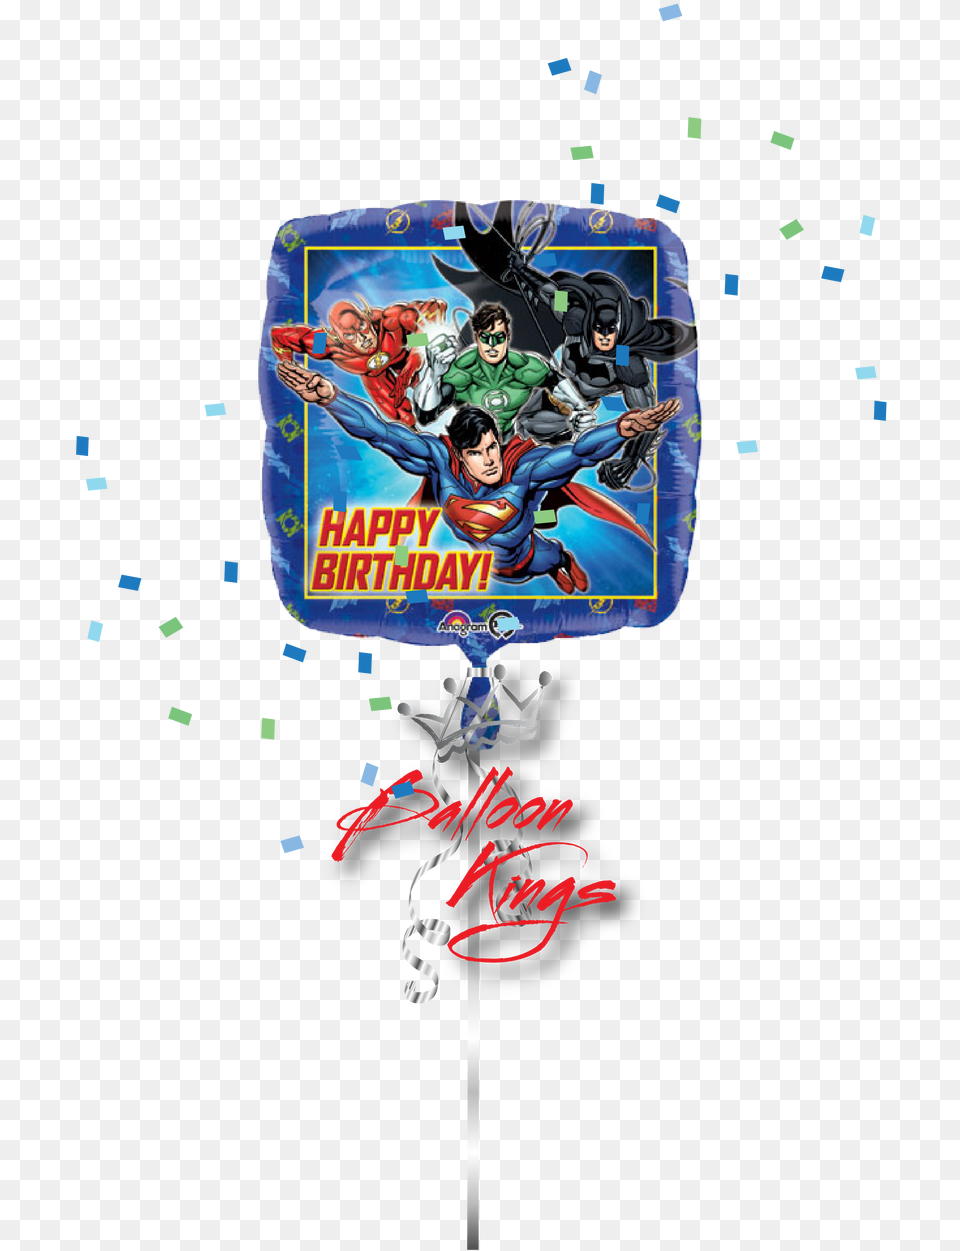 Happy Birthday Justice League 18quot Justice League Happy Birthday Balloon Mylar Balloons, Publication, Book, Comics, Person Png Image